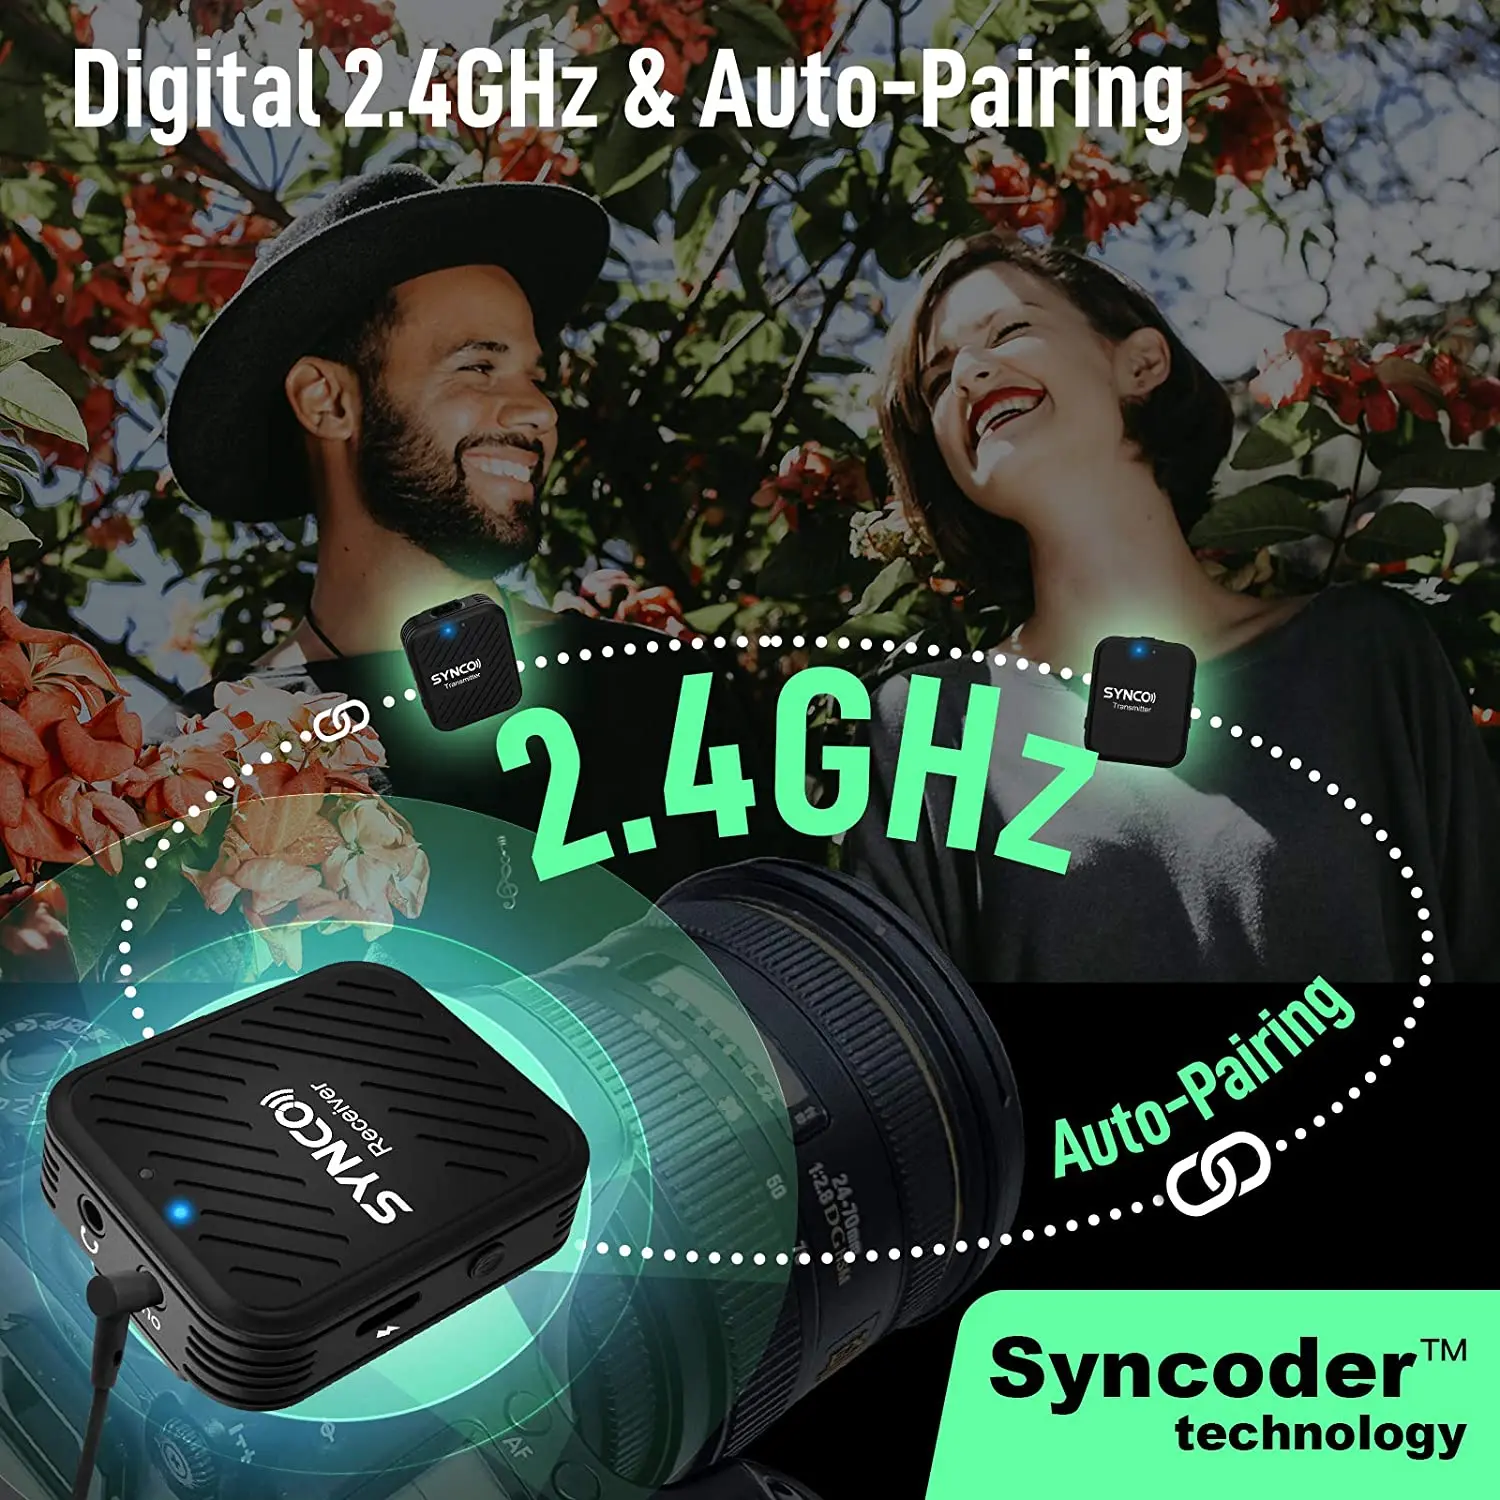 SYNCO G1A2 G1A1 2.4GHz Wireless Lavalier Microphone System for Smartphone Laptop DSLR Tablet Camcorder Recorder Home Studio enlarge